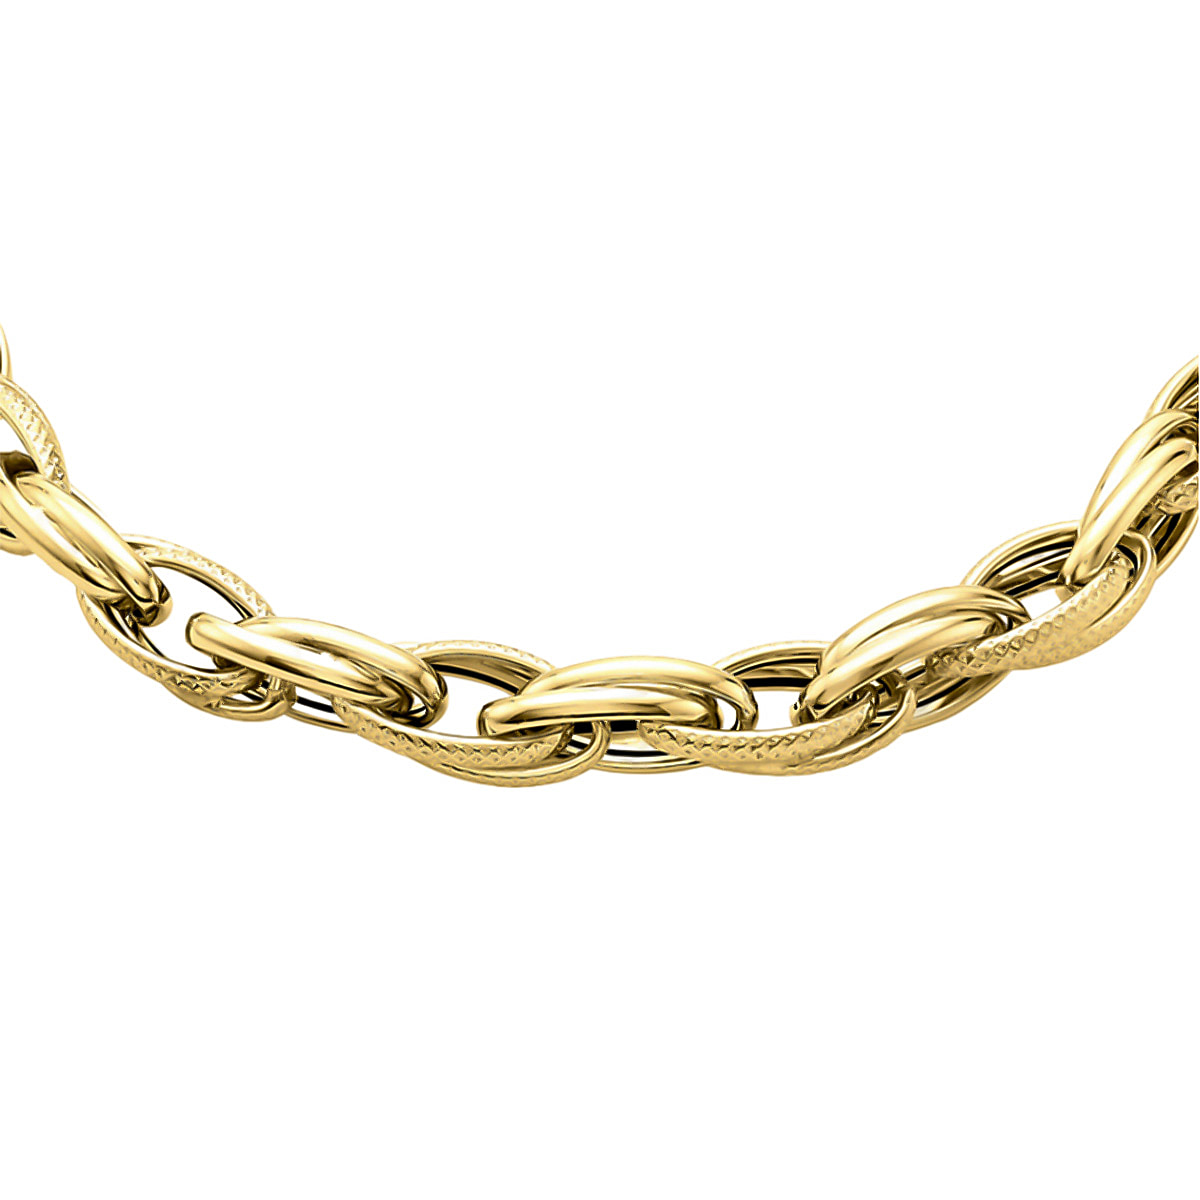 Vicenza Close Out - 9K Yellow Gold Textured & PRINCE of WALES Necklace (Size - 18), Gold Wt. 13.5 Gms